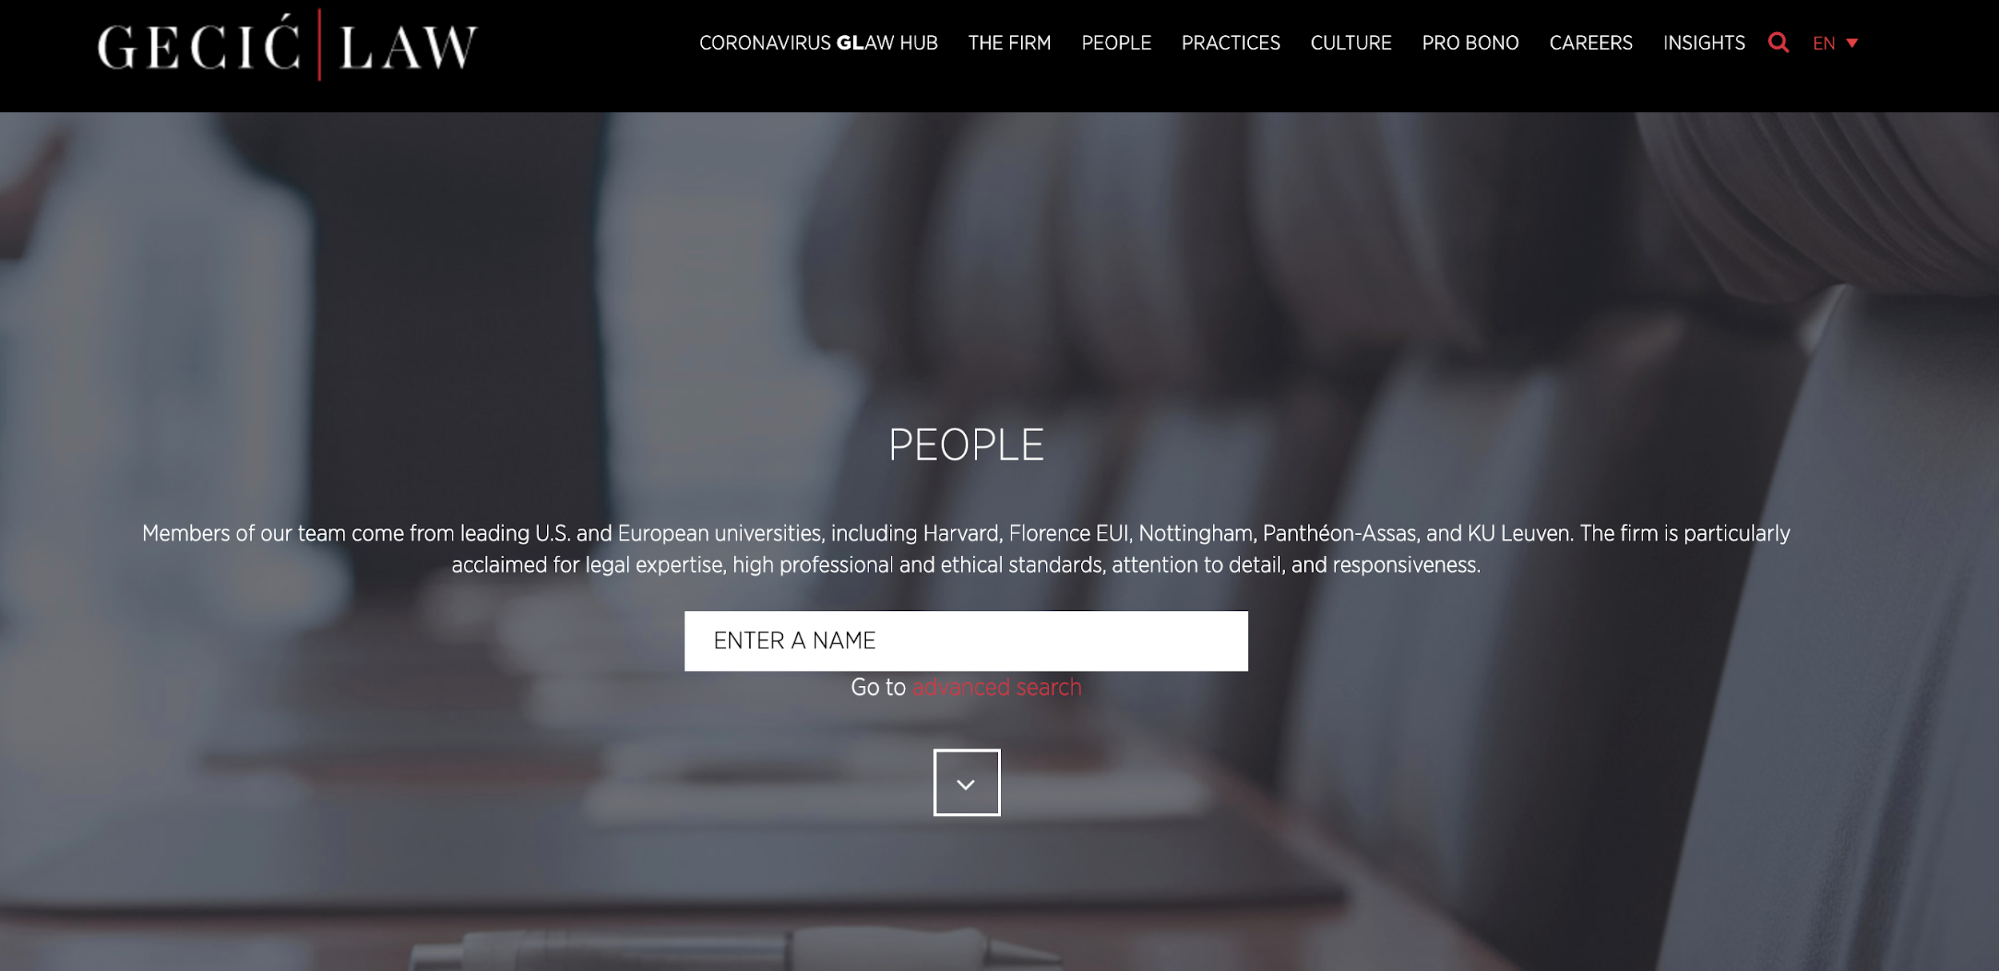 Gecic Law enables legal clients to search by lawyer